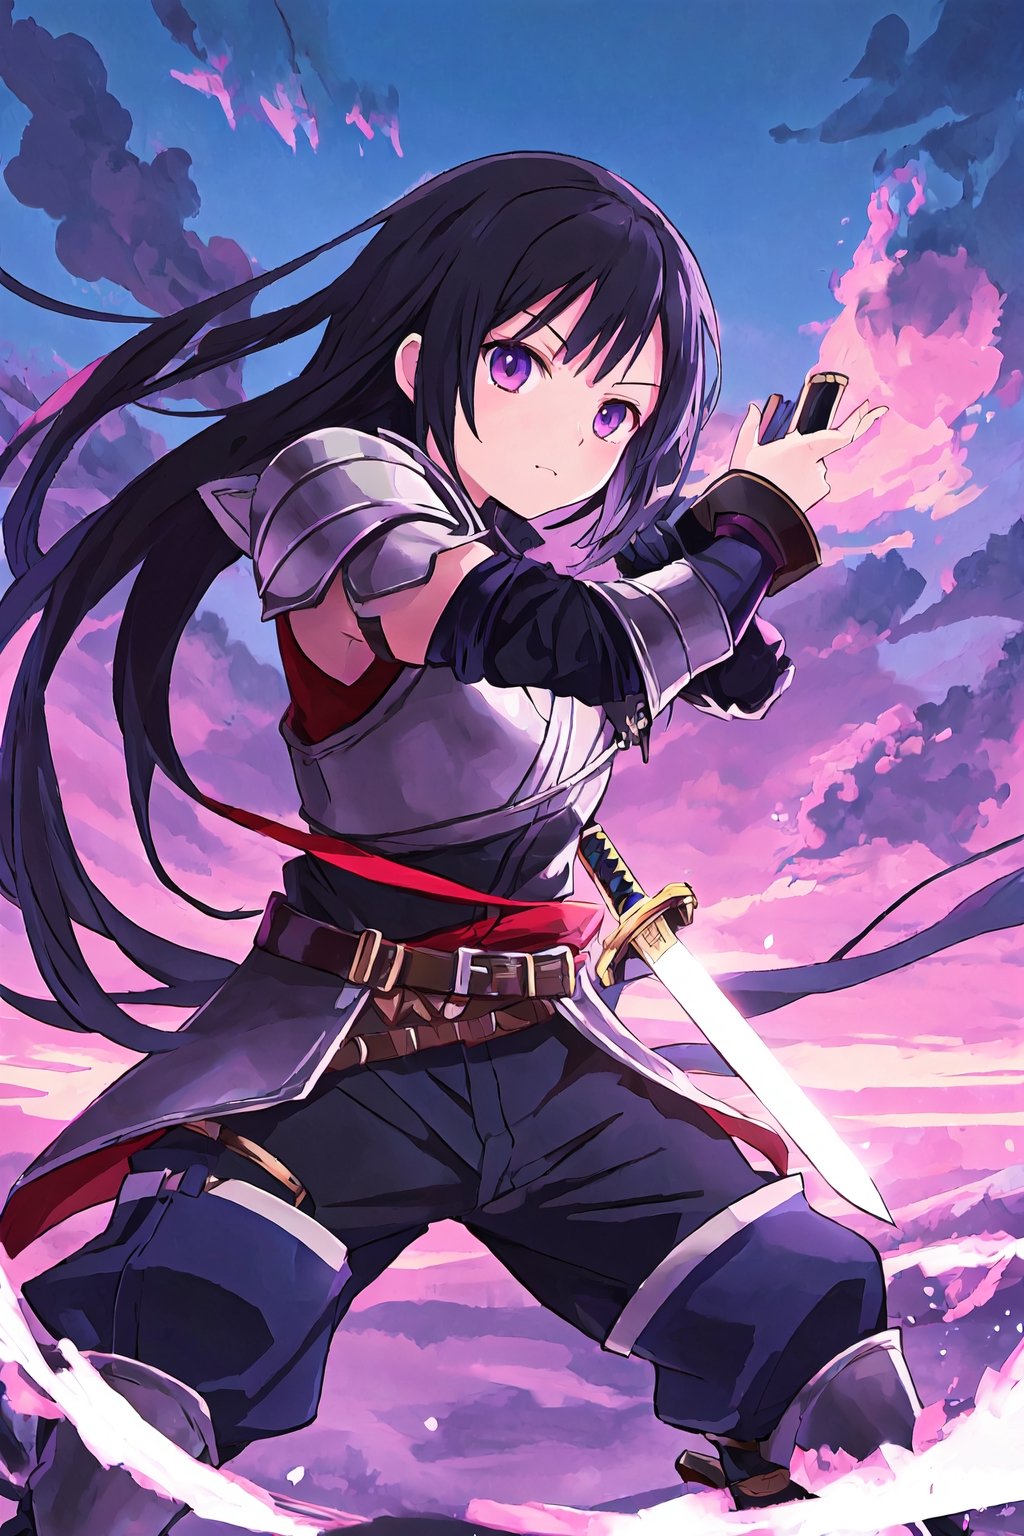 Kaine from kingdom manga, anime, sword, fight pose, black hair, purple armor, masterpiece, high quality, best quality, crimson clouds in the background